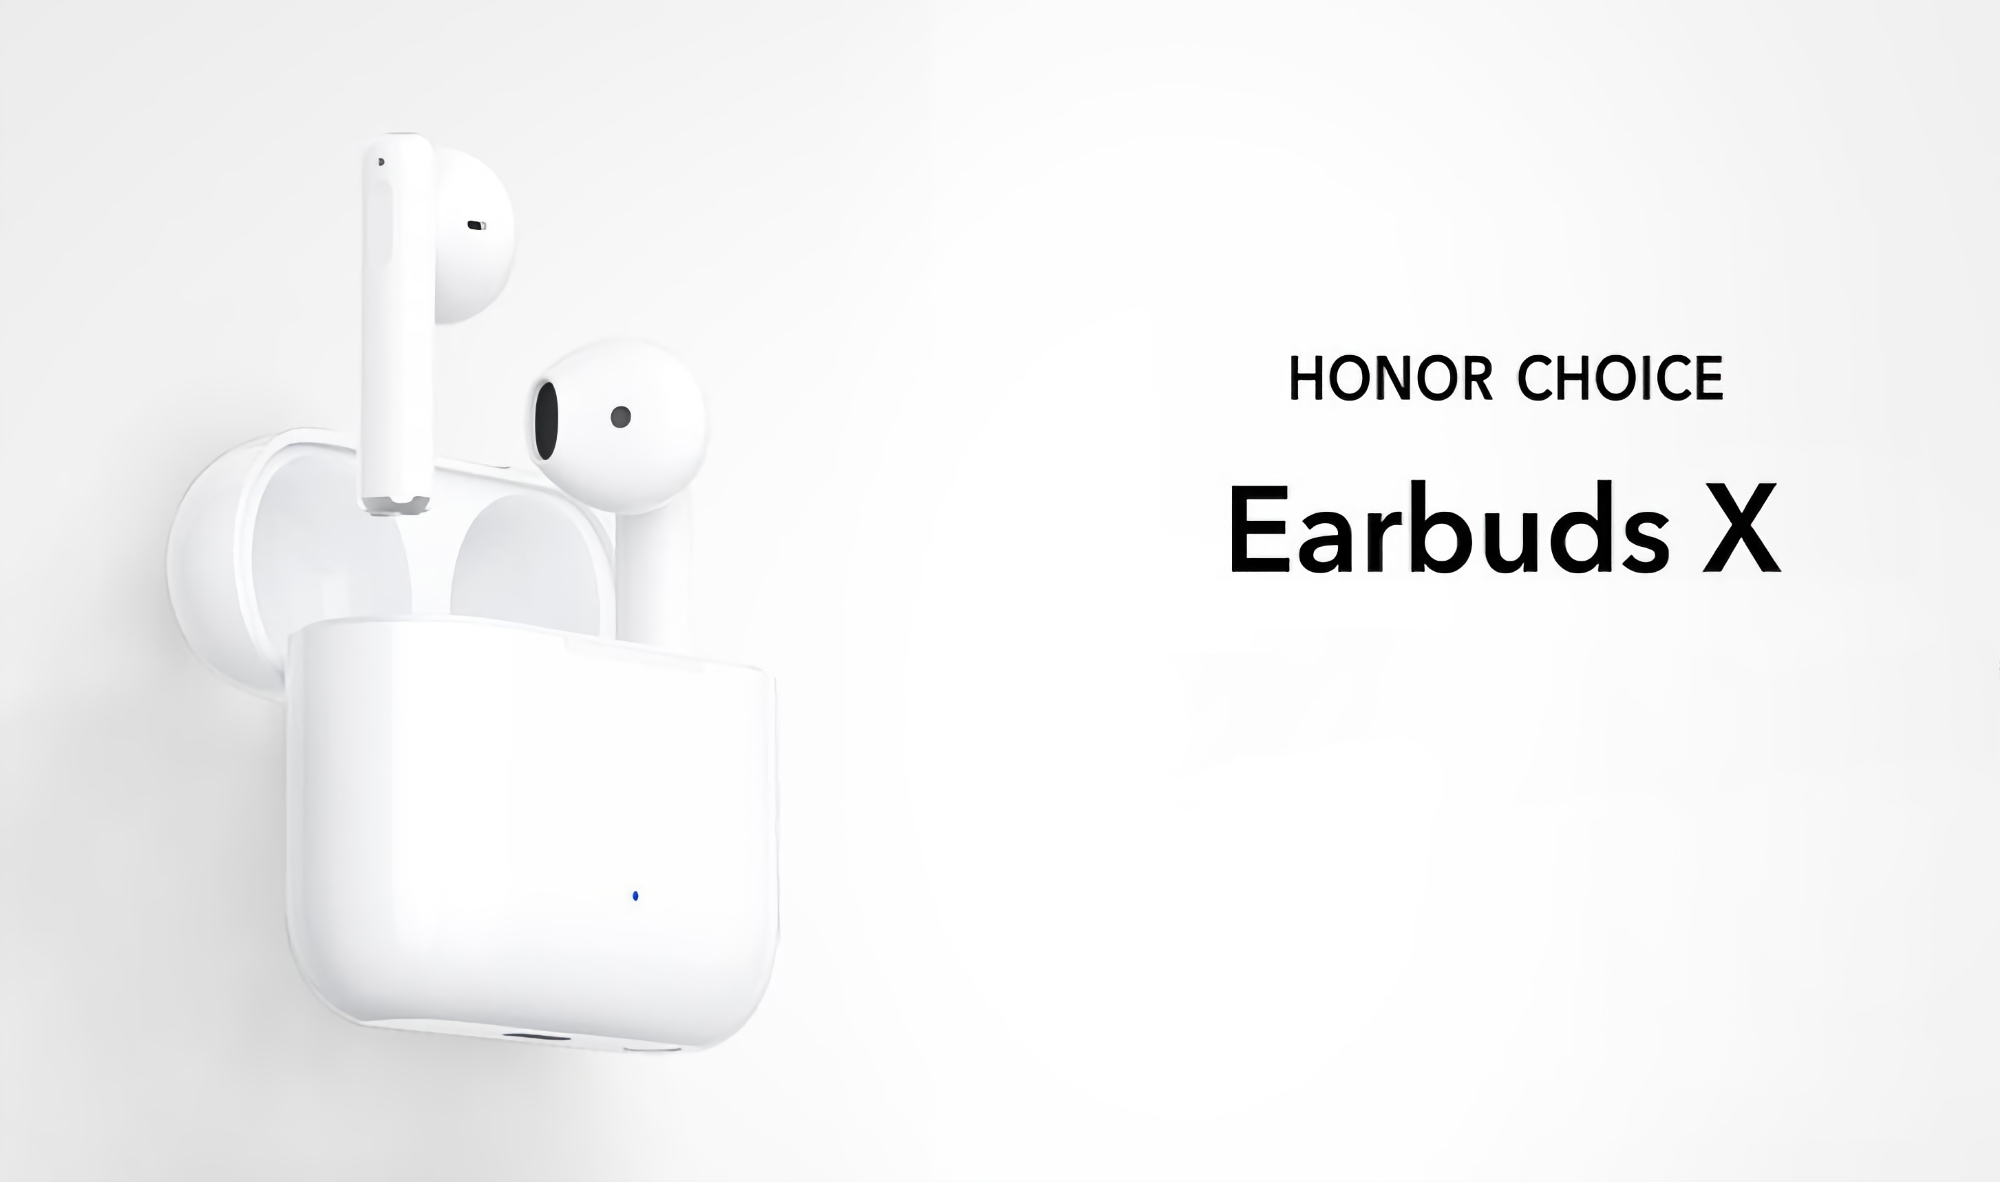 Honor Choice Earbuds X released outside of China: TWS earphones with IPX4 protection and up to 28 battery life for $31